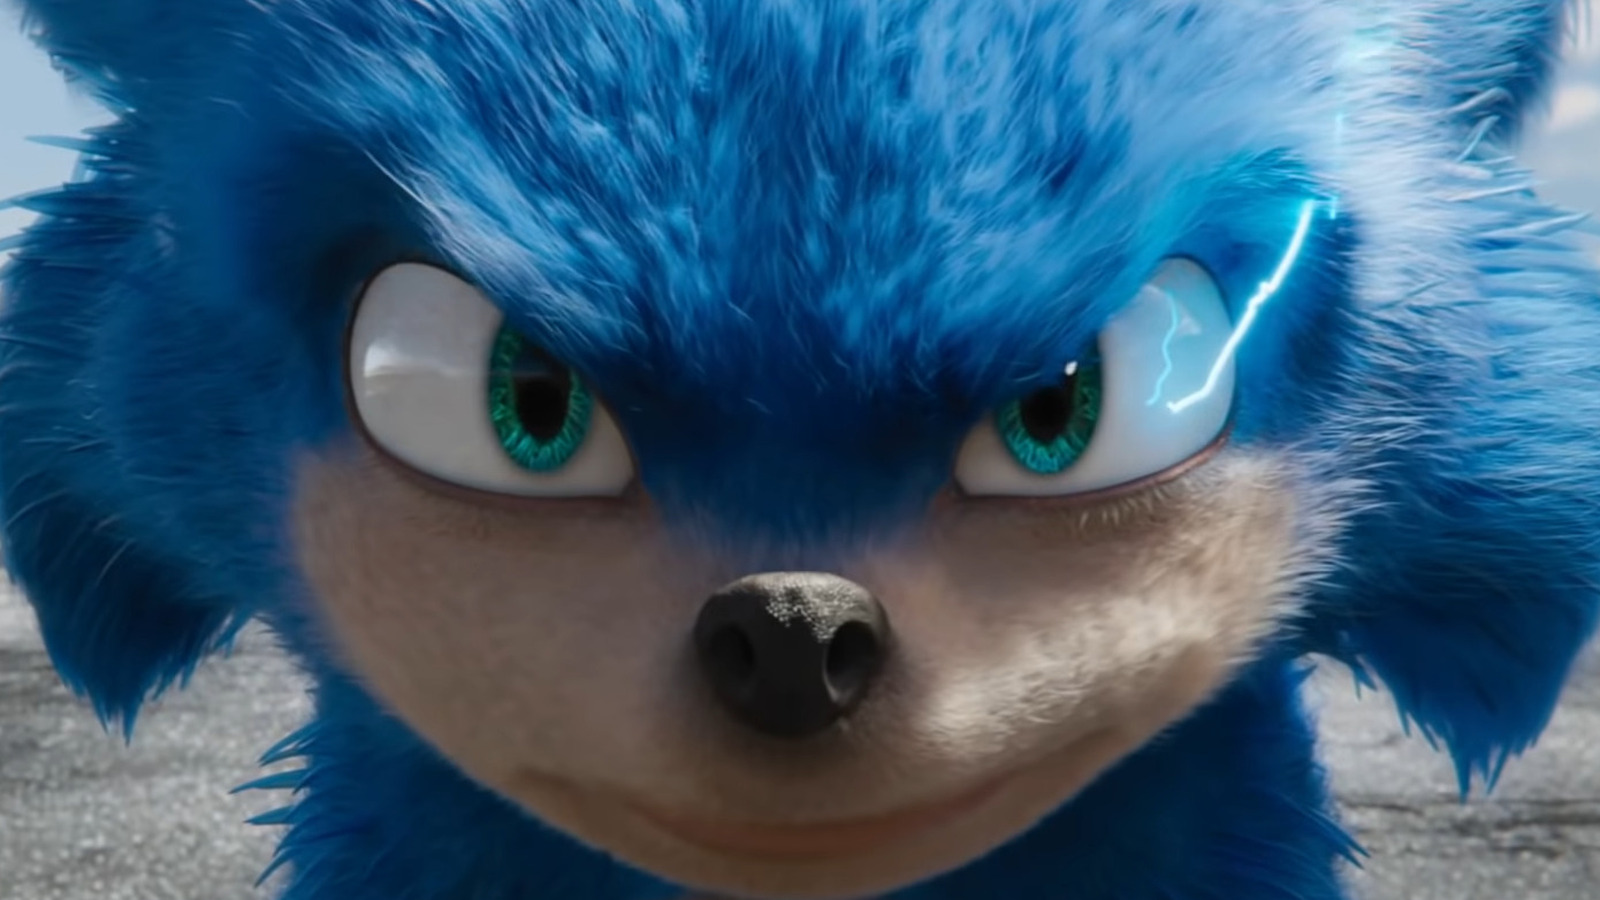 Ummm EARLY (NOT OLD DESIGN) Movie Sonic?